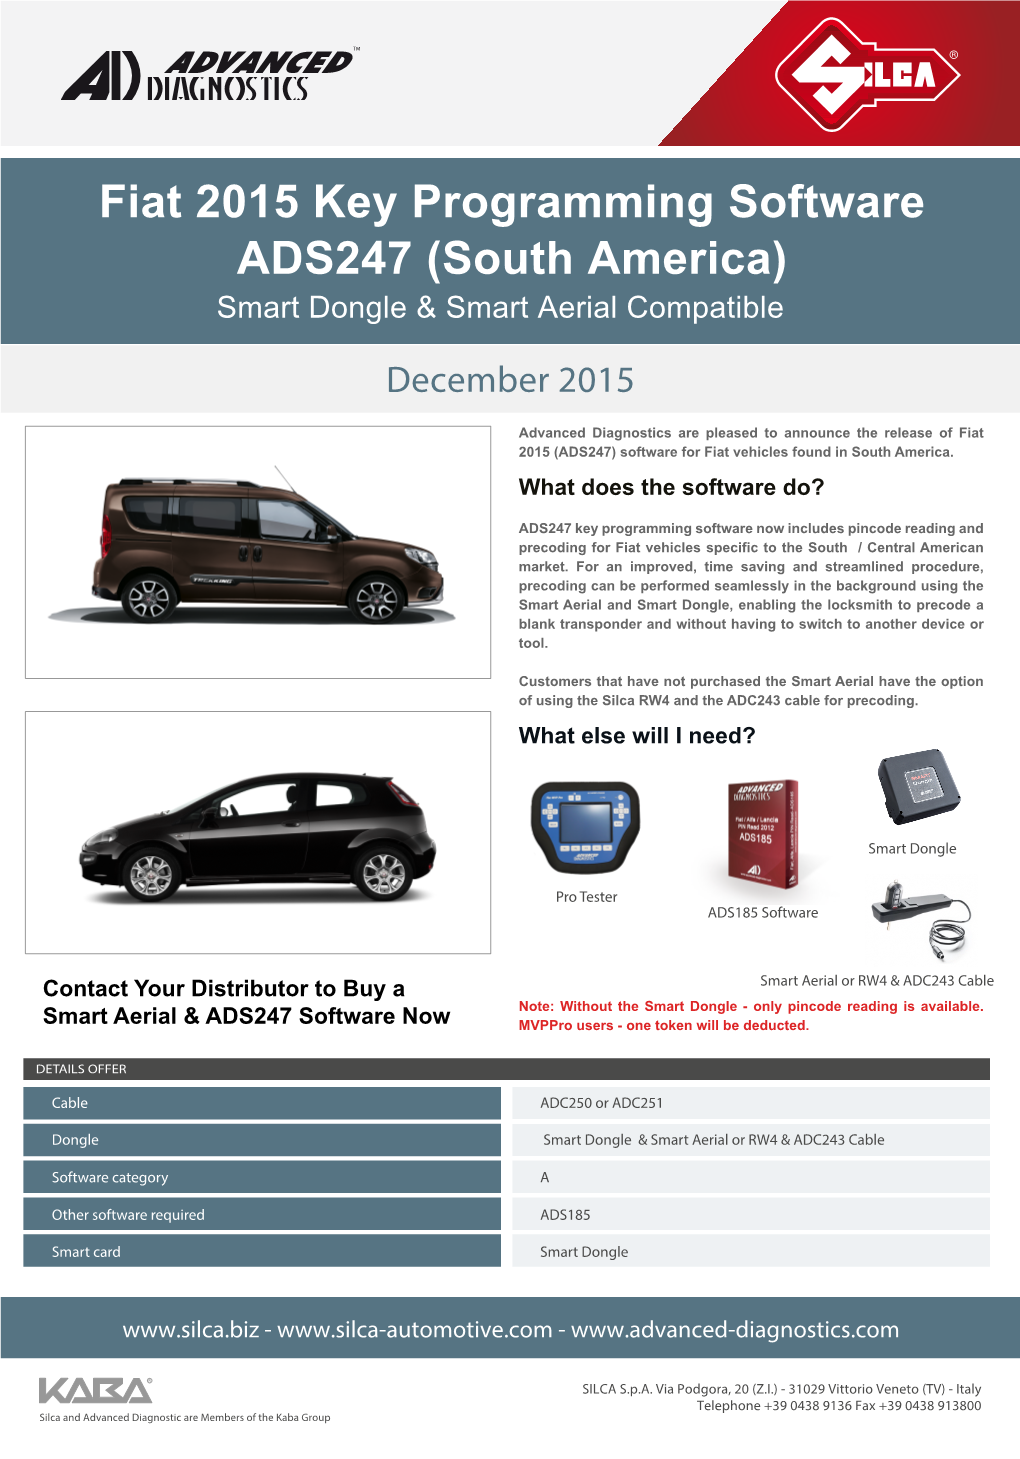 Fiat 2015 Key Programming Software ADS247 (South America) Smart Dongle & Smart Aerial Compatible December 2015